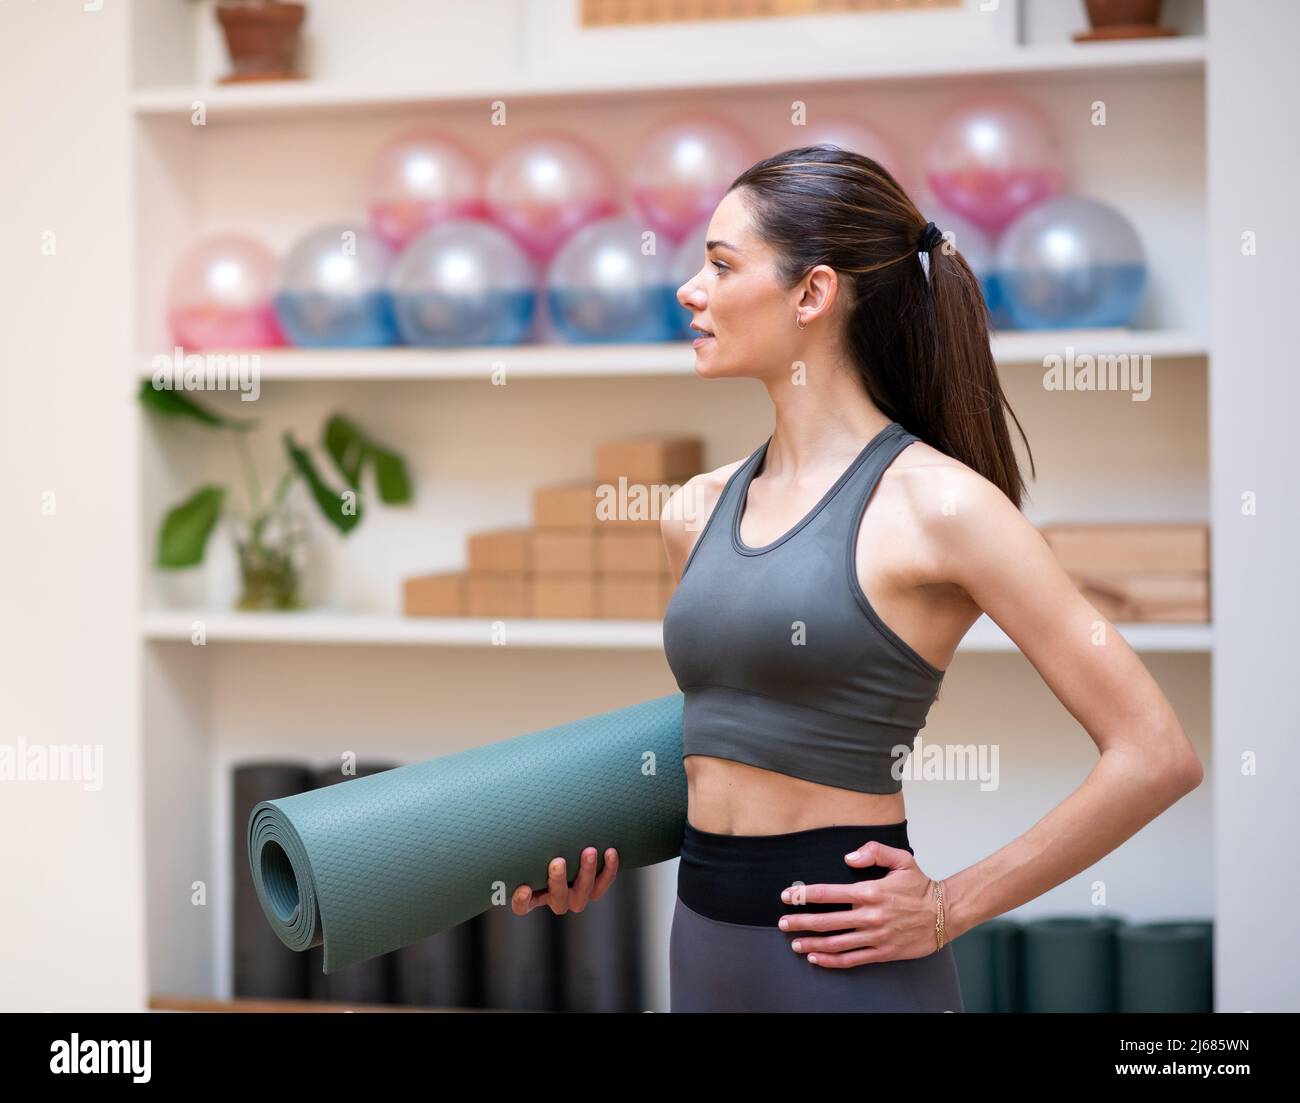 Slim female athlete with rolled up mat holding hand on waist and looking away at start of fitness workout in gym Stock Photo